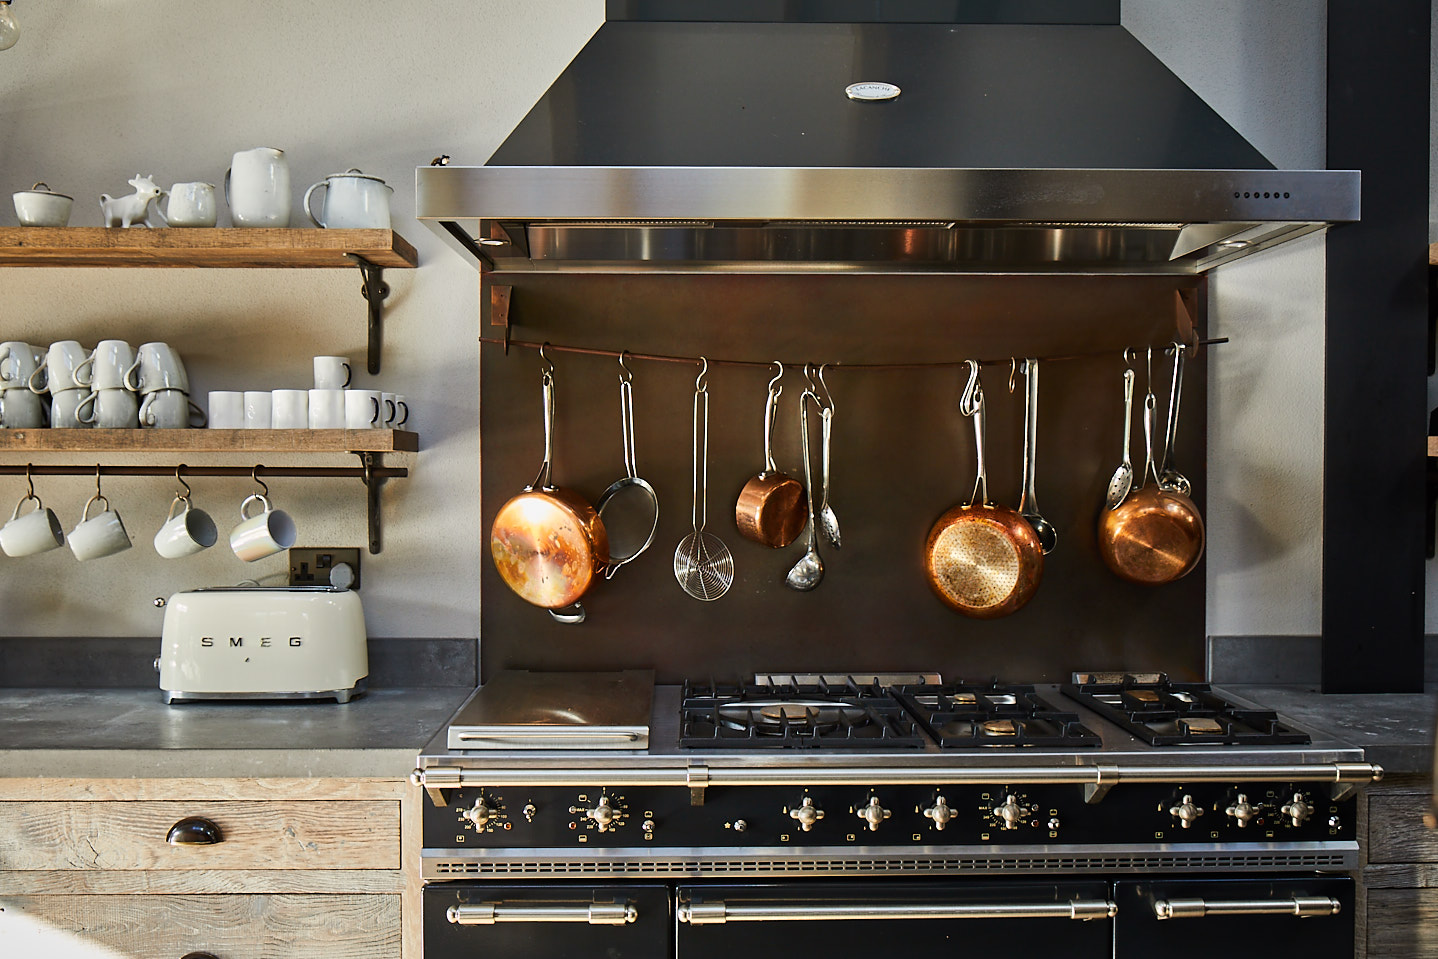 Copper pans hanging above range cooker with large industrial stainless steel extraction